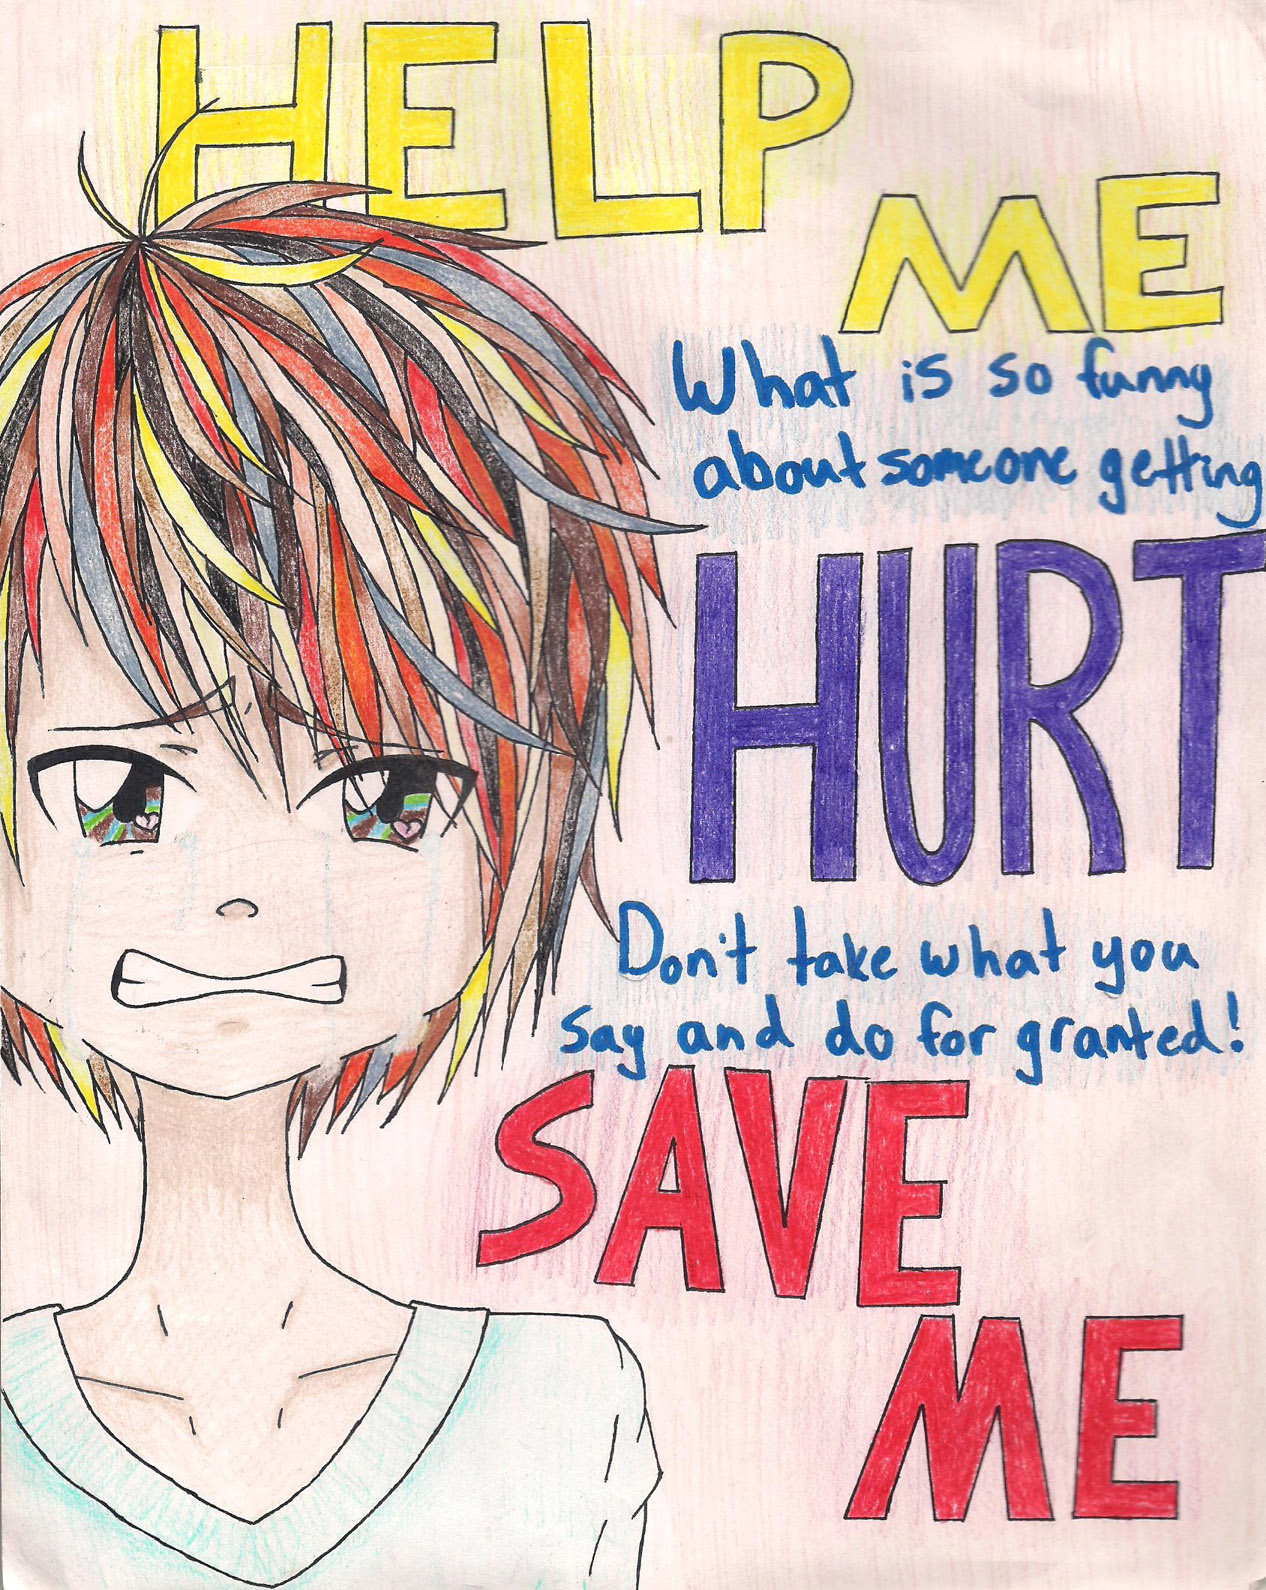 ANTI-BULLYING POSTER, by Kelsey Mead